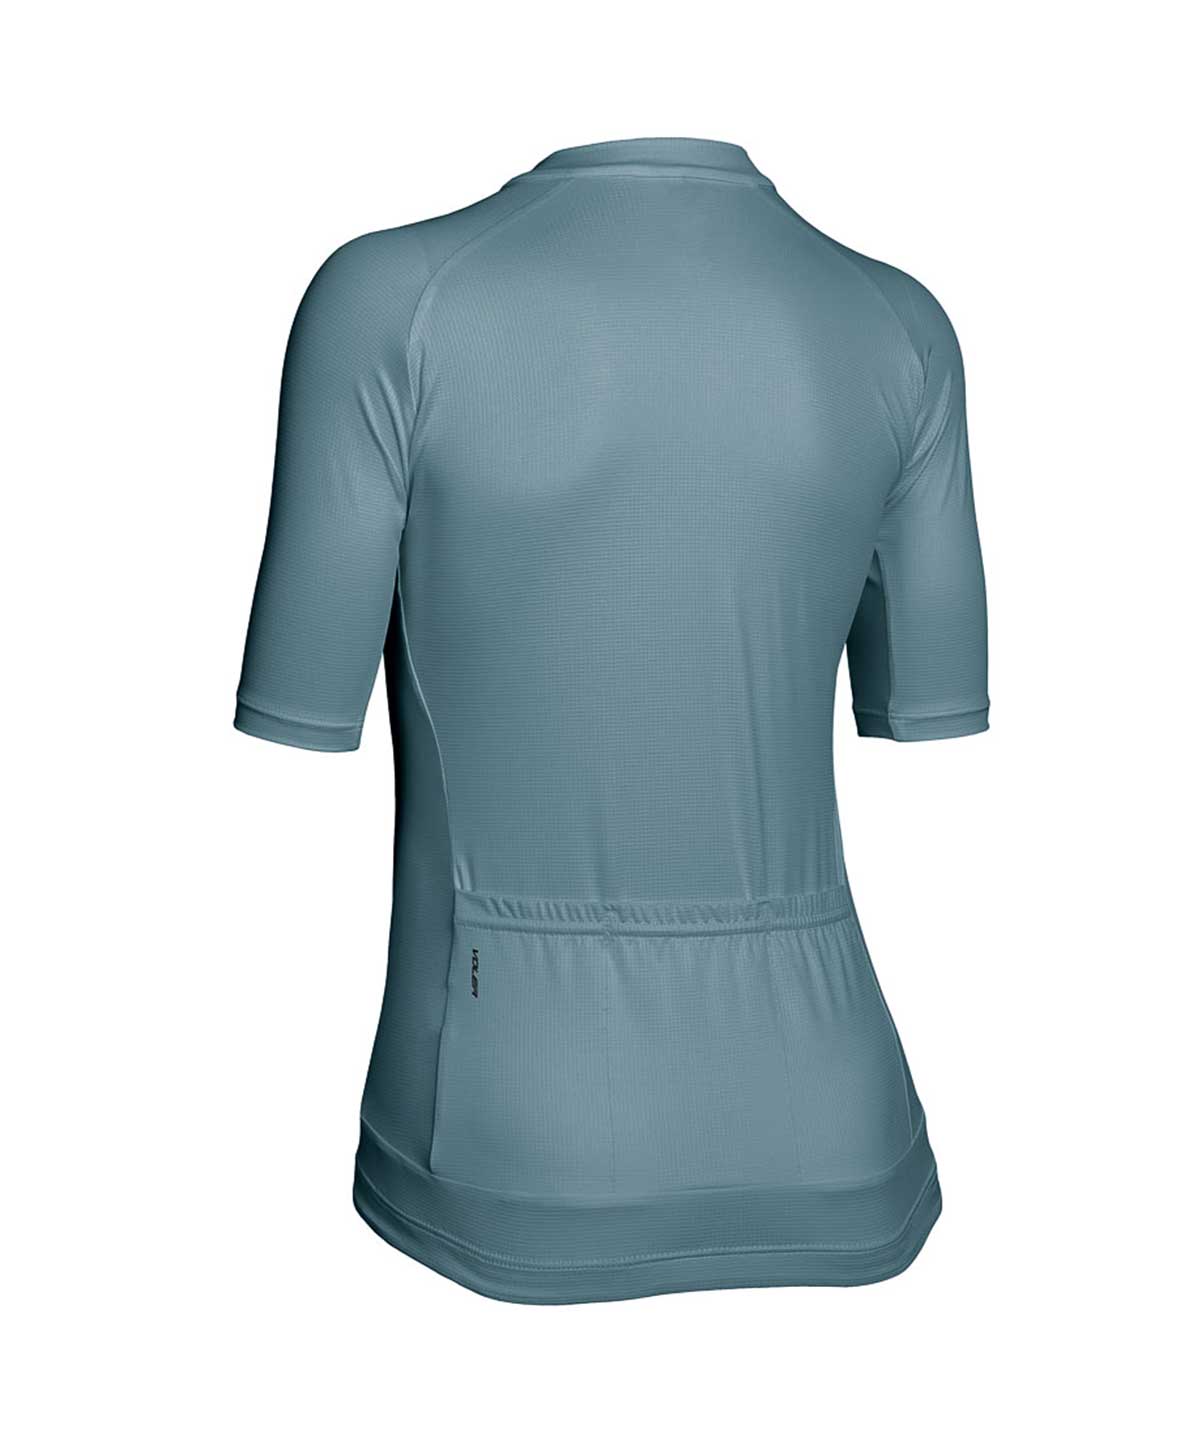 W. VELOCITY AIR JERSEY - SOLID